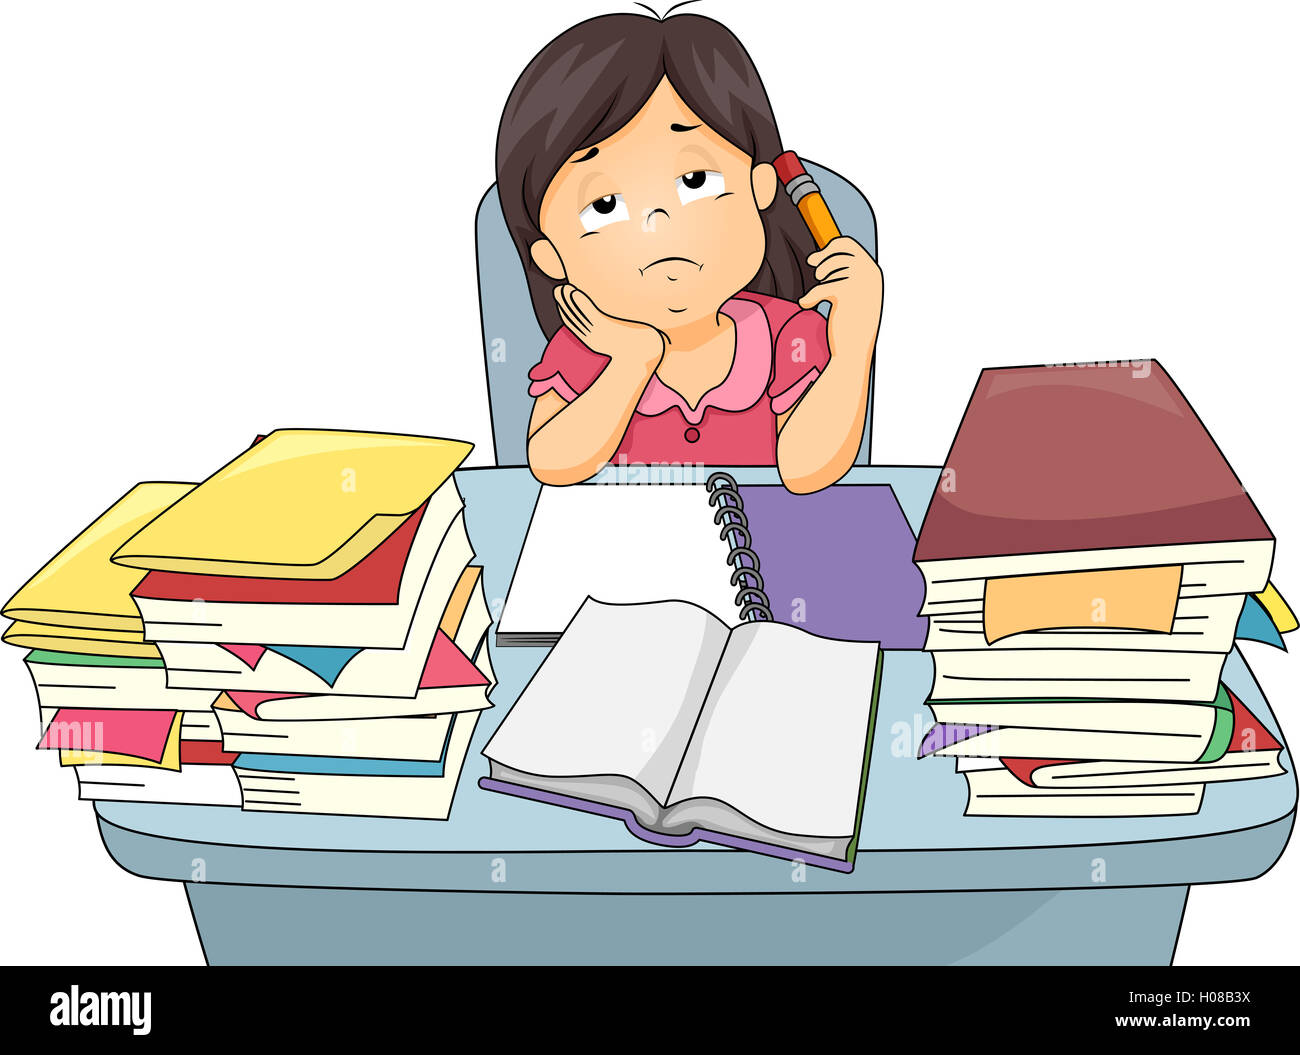 Illustration of a Little Girl Getting Bored While Studying Stock Photo -  Alamy